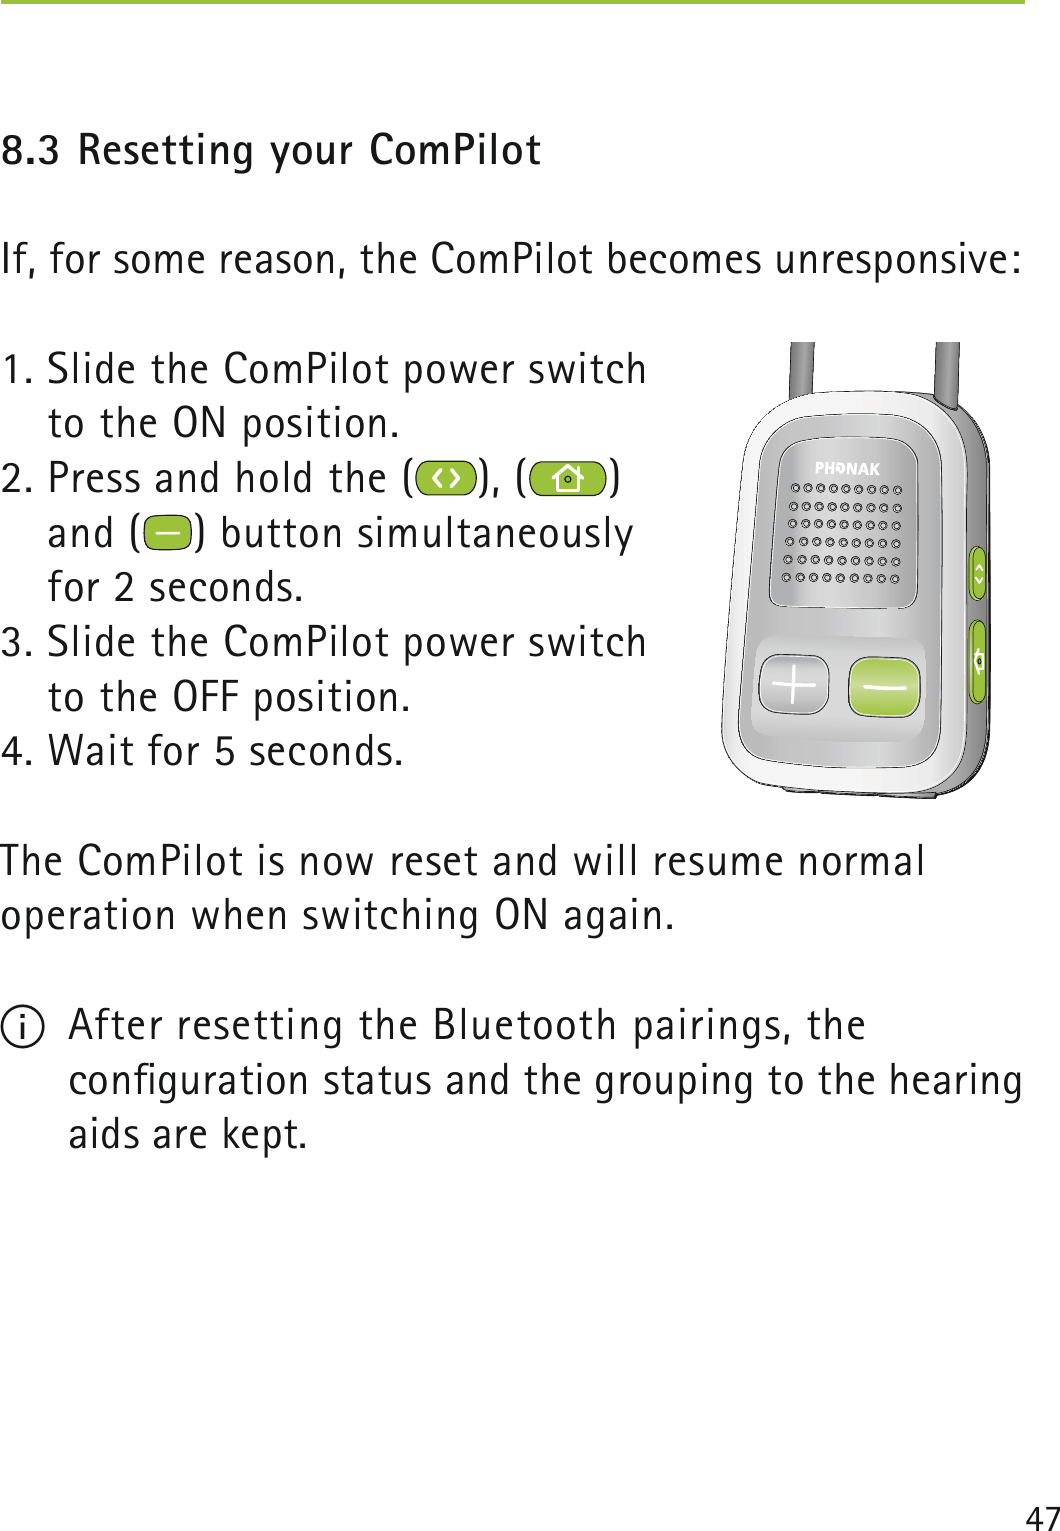 478.3 Resetting your ComPilotIf, for some reason, the ComPilot becomes unresponsive:1. Slide the ComPilot power switch  to the ON position.2. Press and hold the ( ), ( )  and ( ) button simultaneously  for 2 seconds. 3. Slide the ComPilot power switch  to the OFF position.4. Wait for 5 seconds.The ComPilot is now reset and will resume normal  operation when switching ON again.I  After resetting the Bluetooth pairings, the  conﬁguration status and the grouping to the hearing aids are kept.  